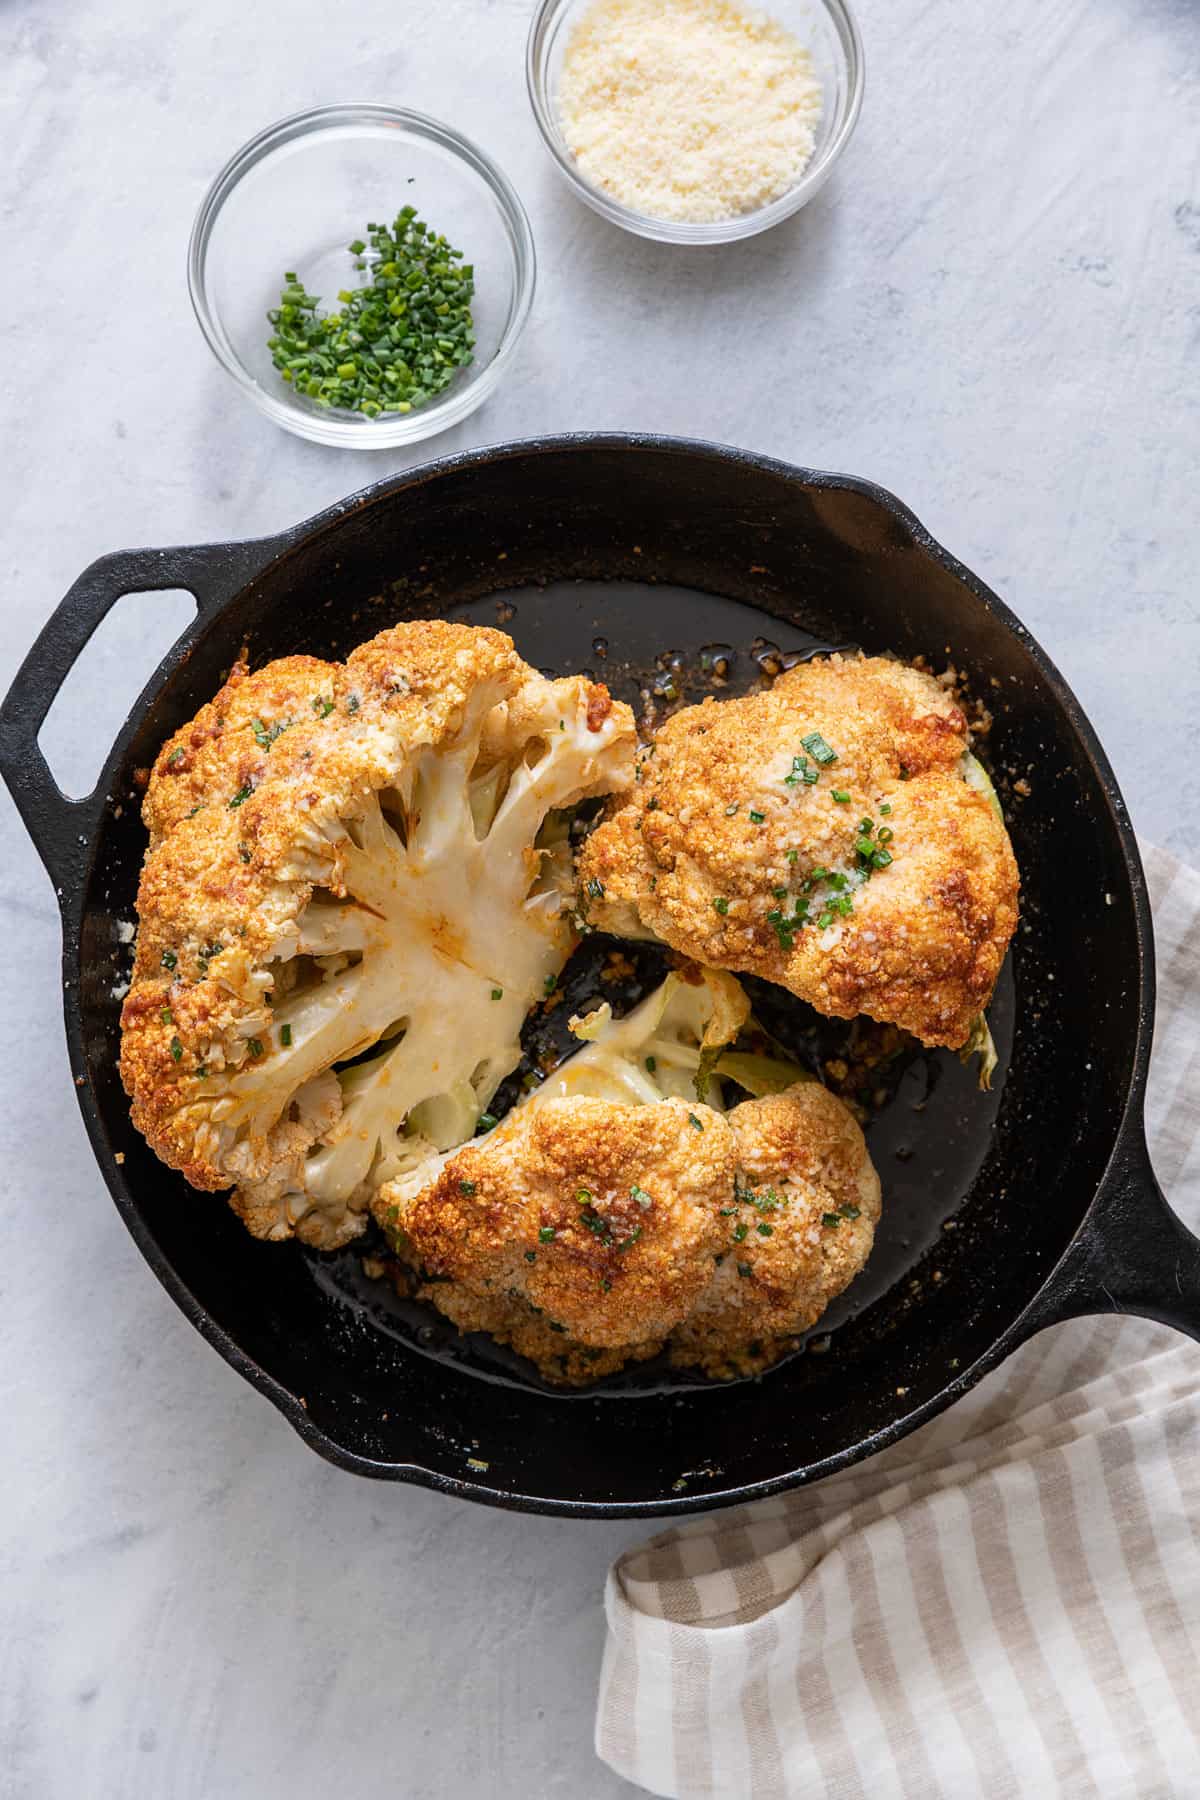 Roasted cauliflower in cast iron skillet cut into large pieces.